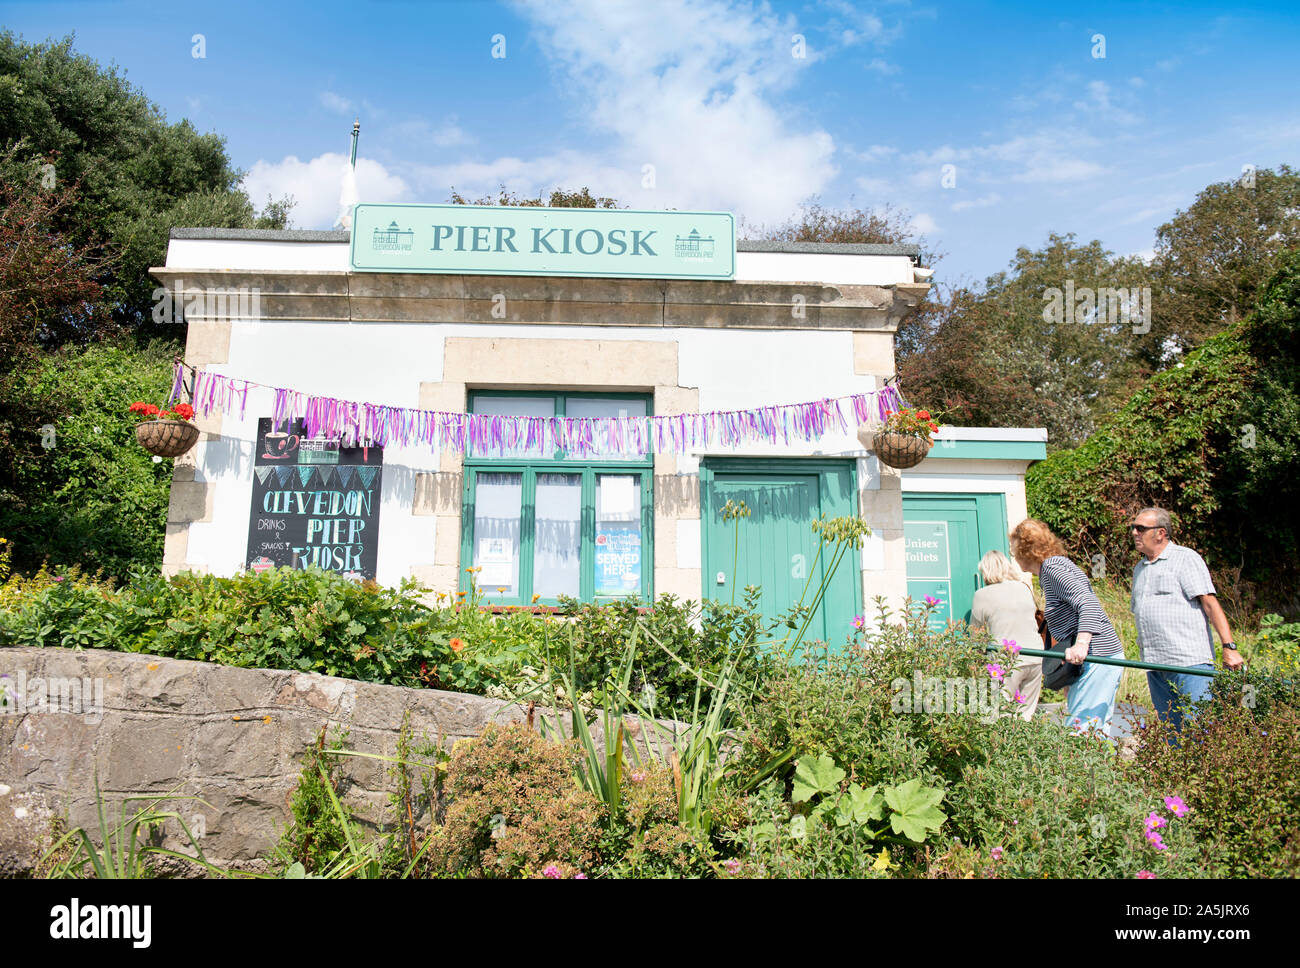 The Pier Kiosk in Clevedon, North Somerset UK Stock Photo